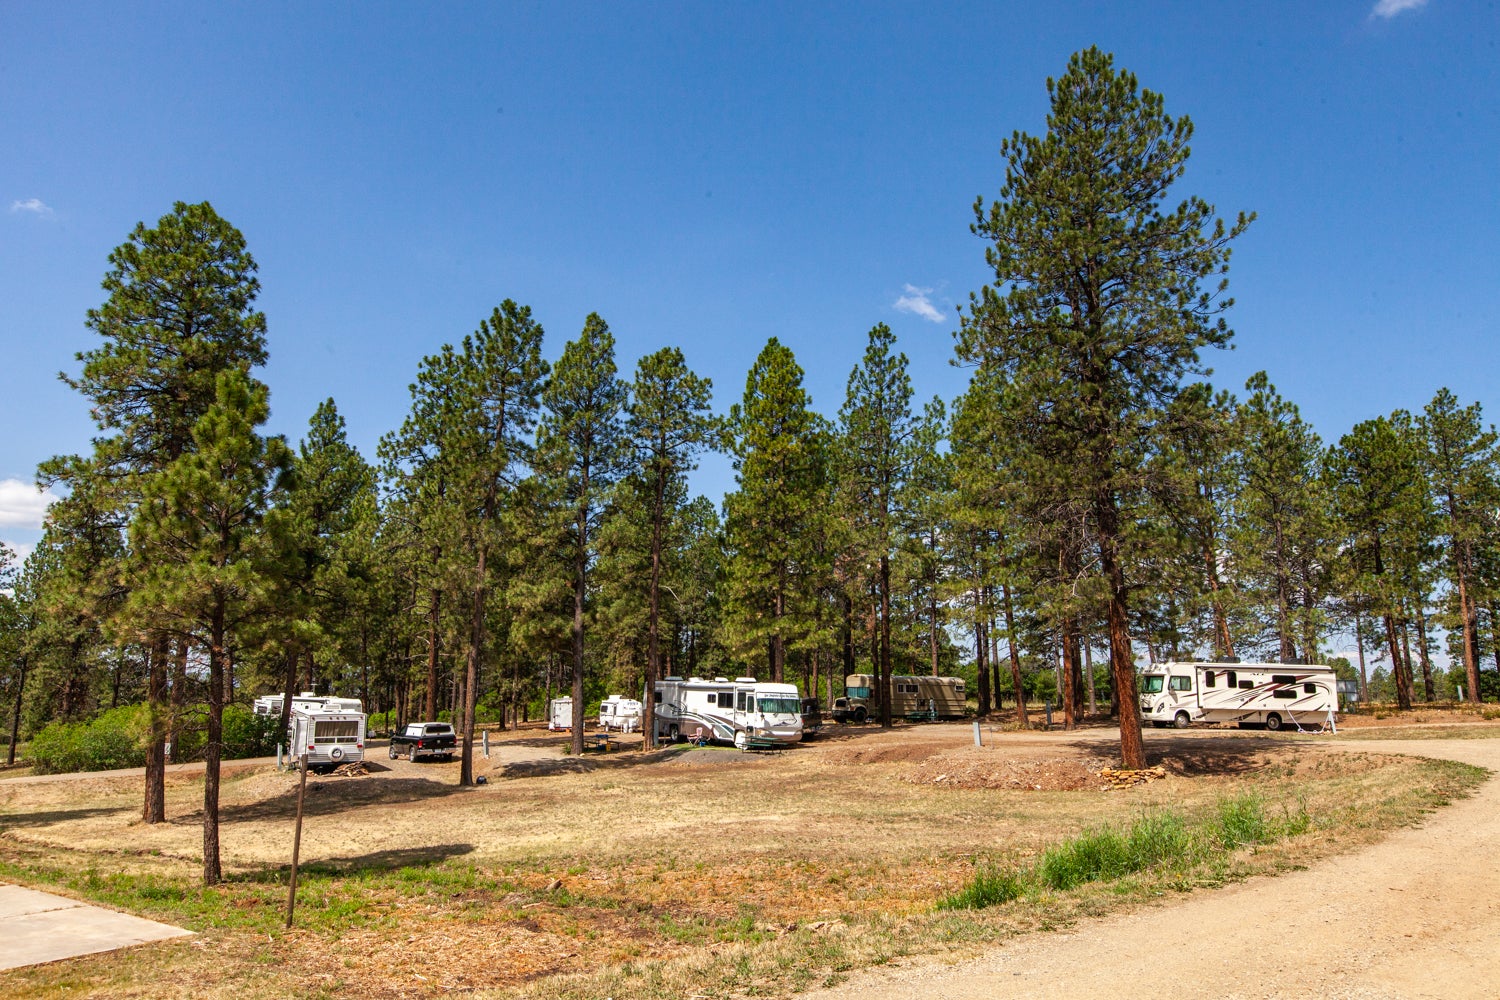 spacious RV sites situated in the trees